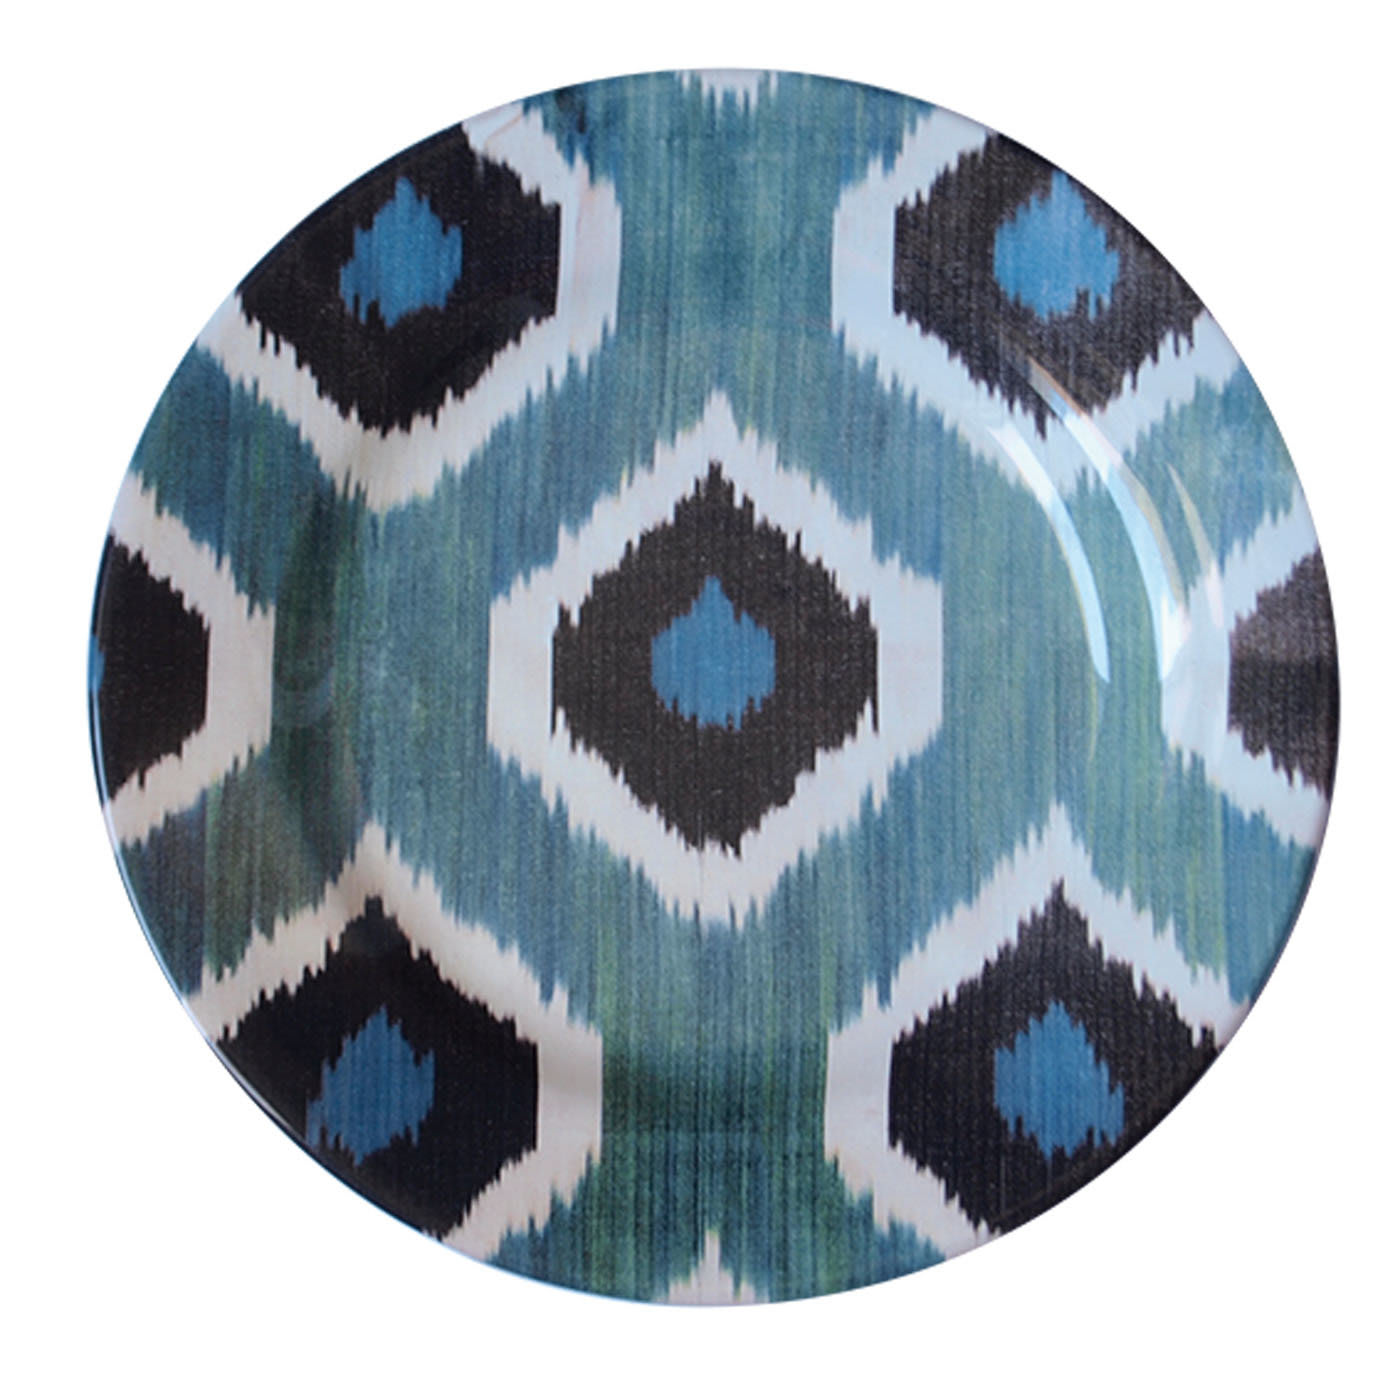 Set of 6 Ikat Glass Plates in Blue - Les Ottomans